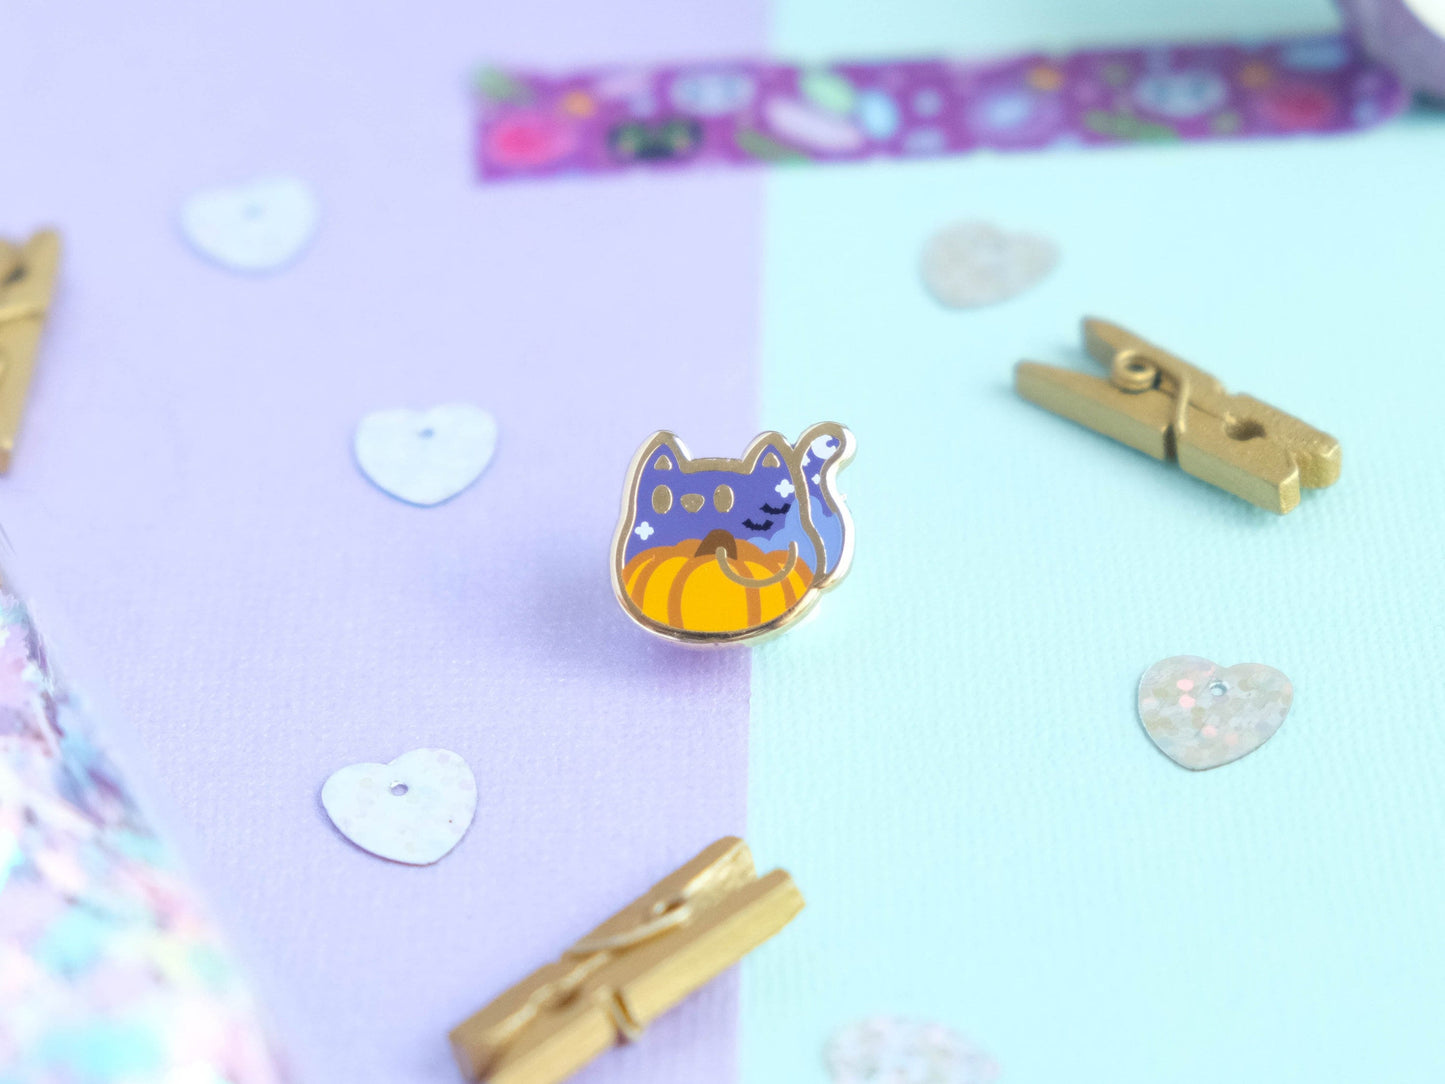 LIMITED EDITION - Mini Hard Enamel Pin Cute Cat with pumpkin for Halloween perfect as board filler pin